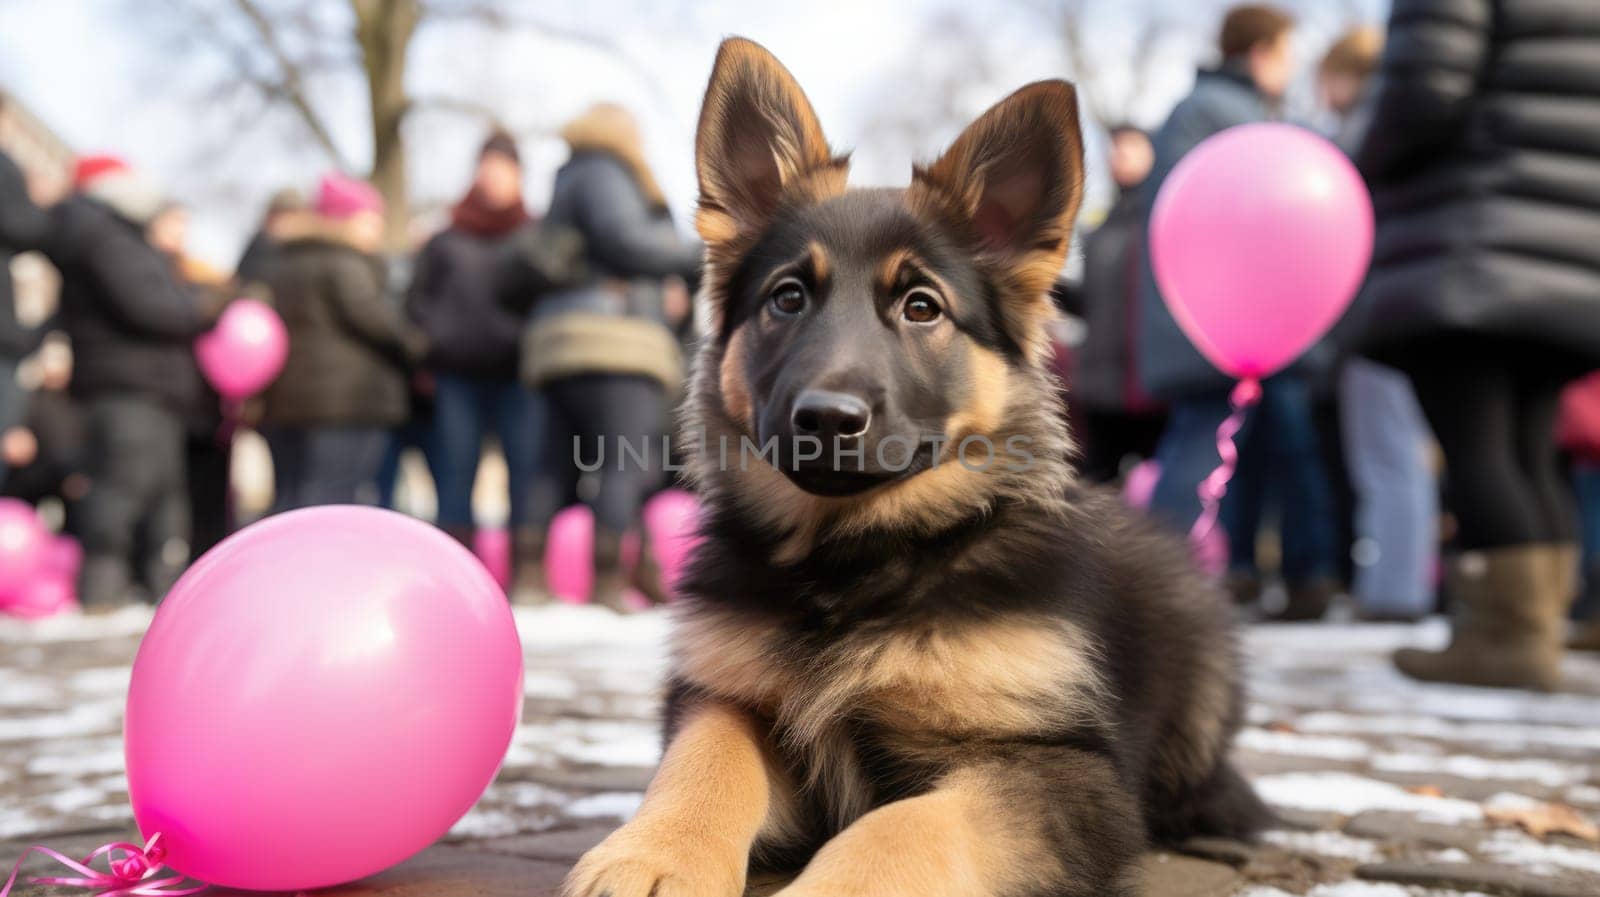 Lovely German shepherd puppy with Valentine's day pink balloons lying on the street.